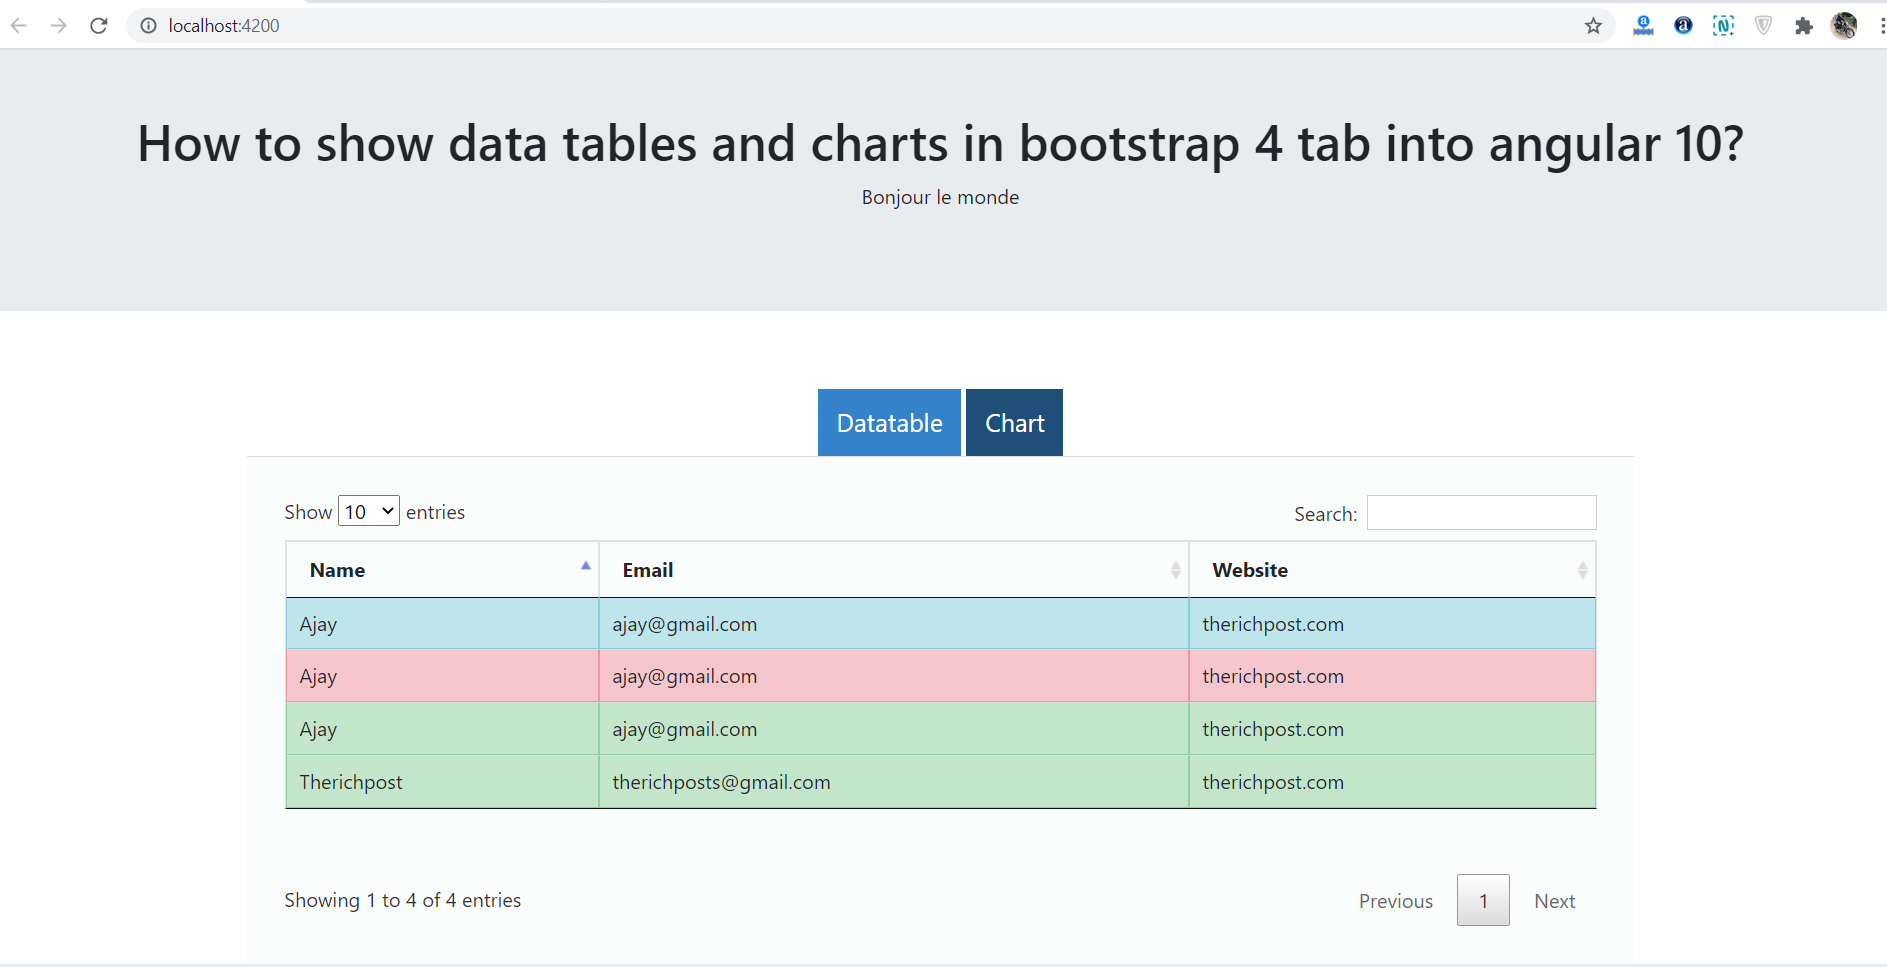 How to show data tables and charts in bootstrap 4 tab into angular 10?